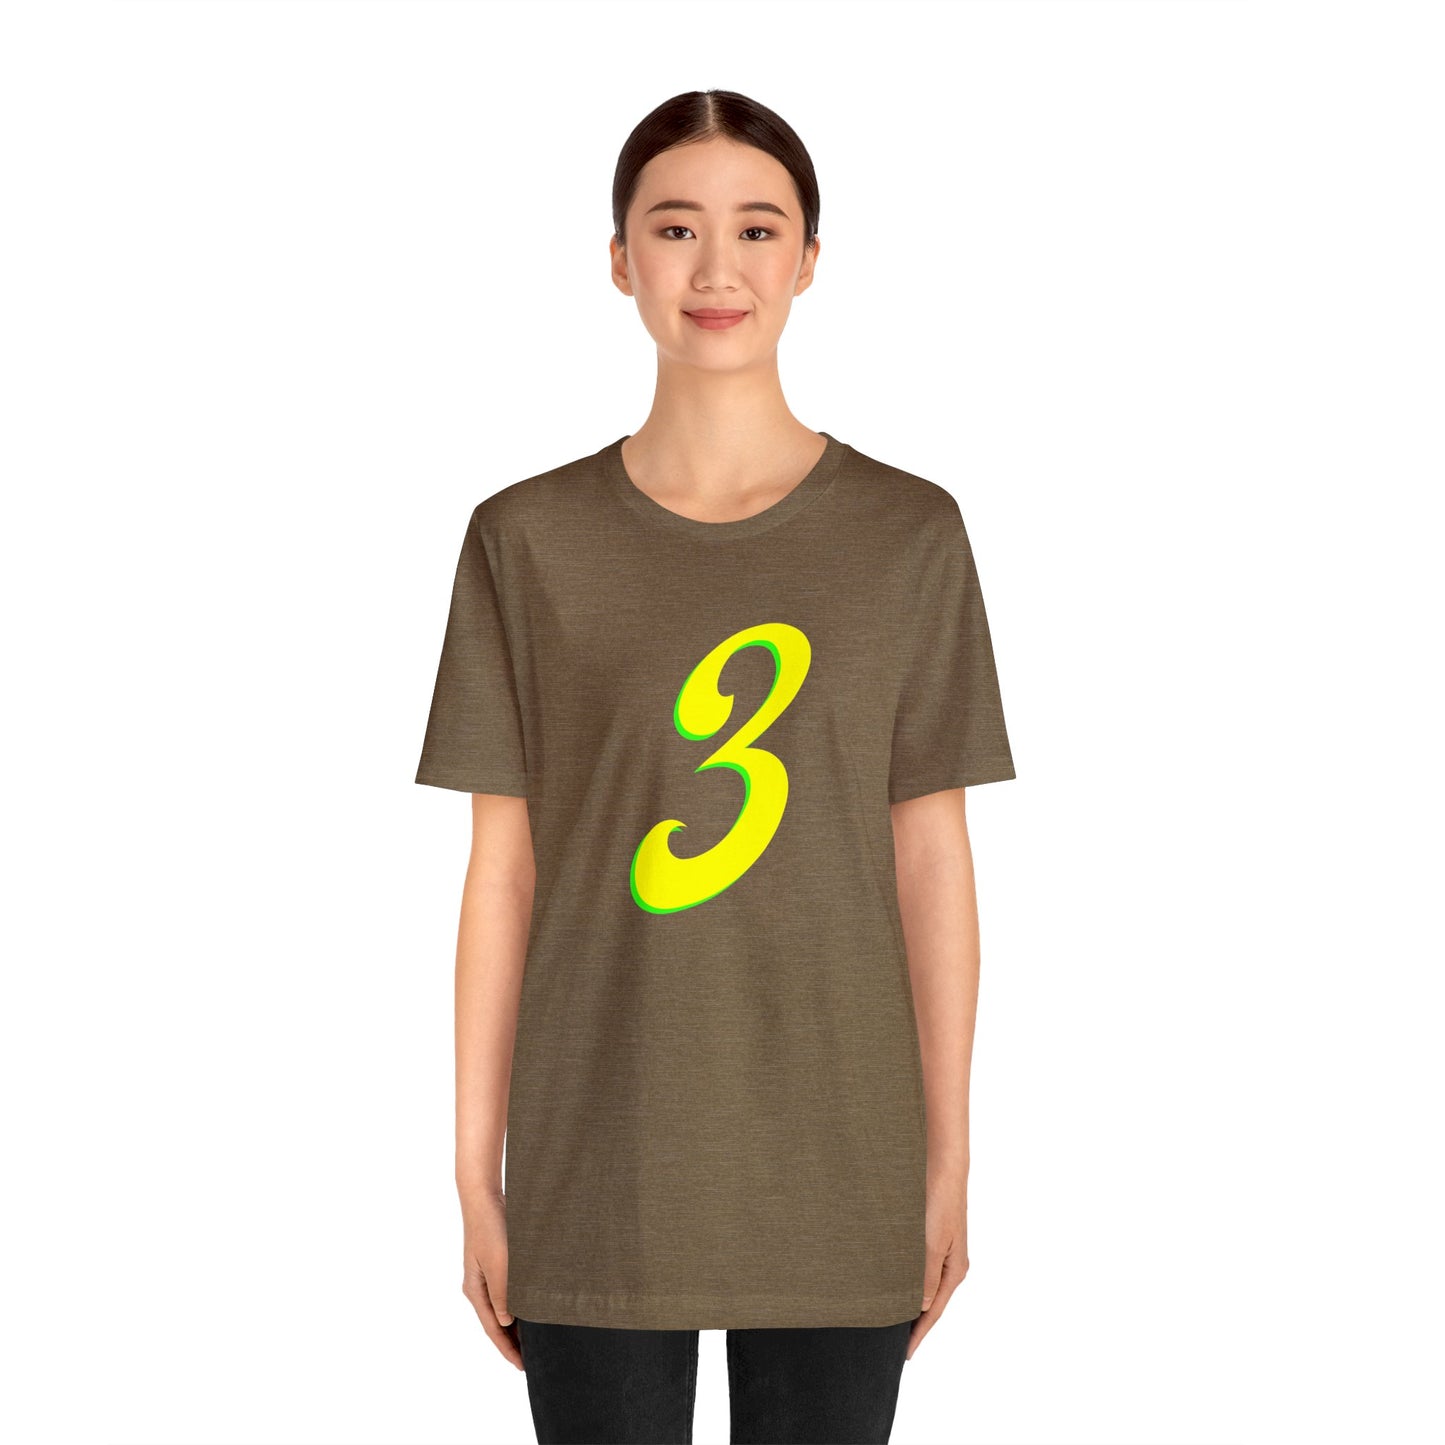 Number 3 Design - Soft Cotton Tee for birthdays and celebrations, Gift for friends and family, Multiple Options by clothezy.com in Gold Size Medium - Buy Now